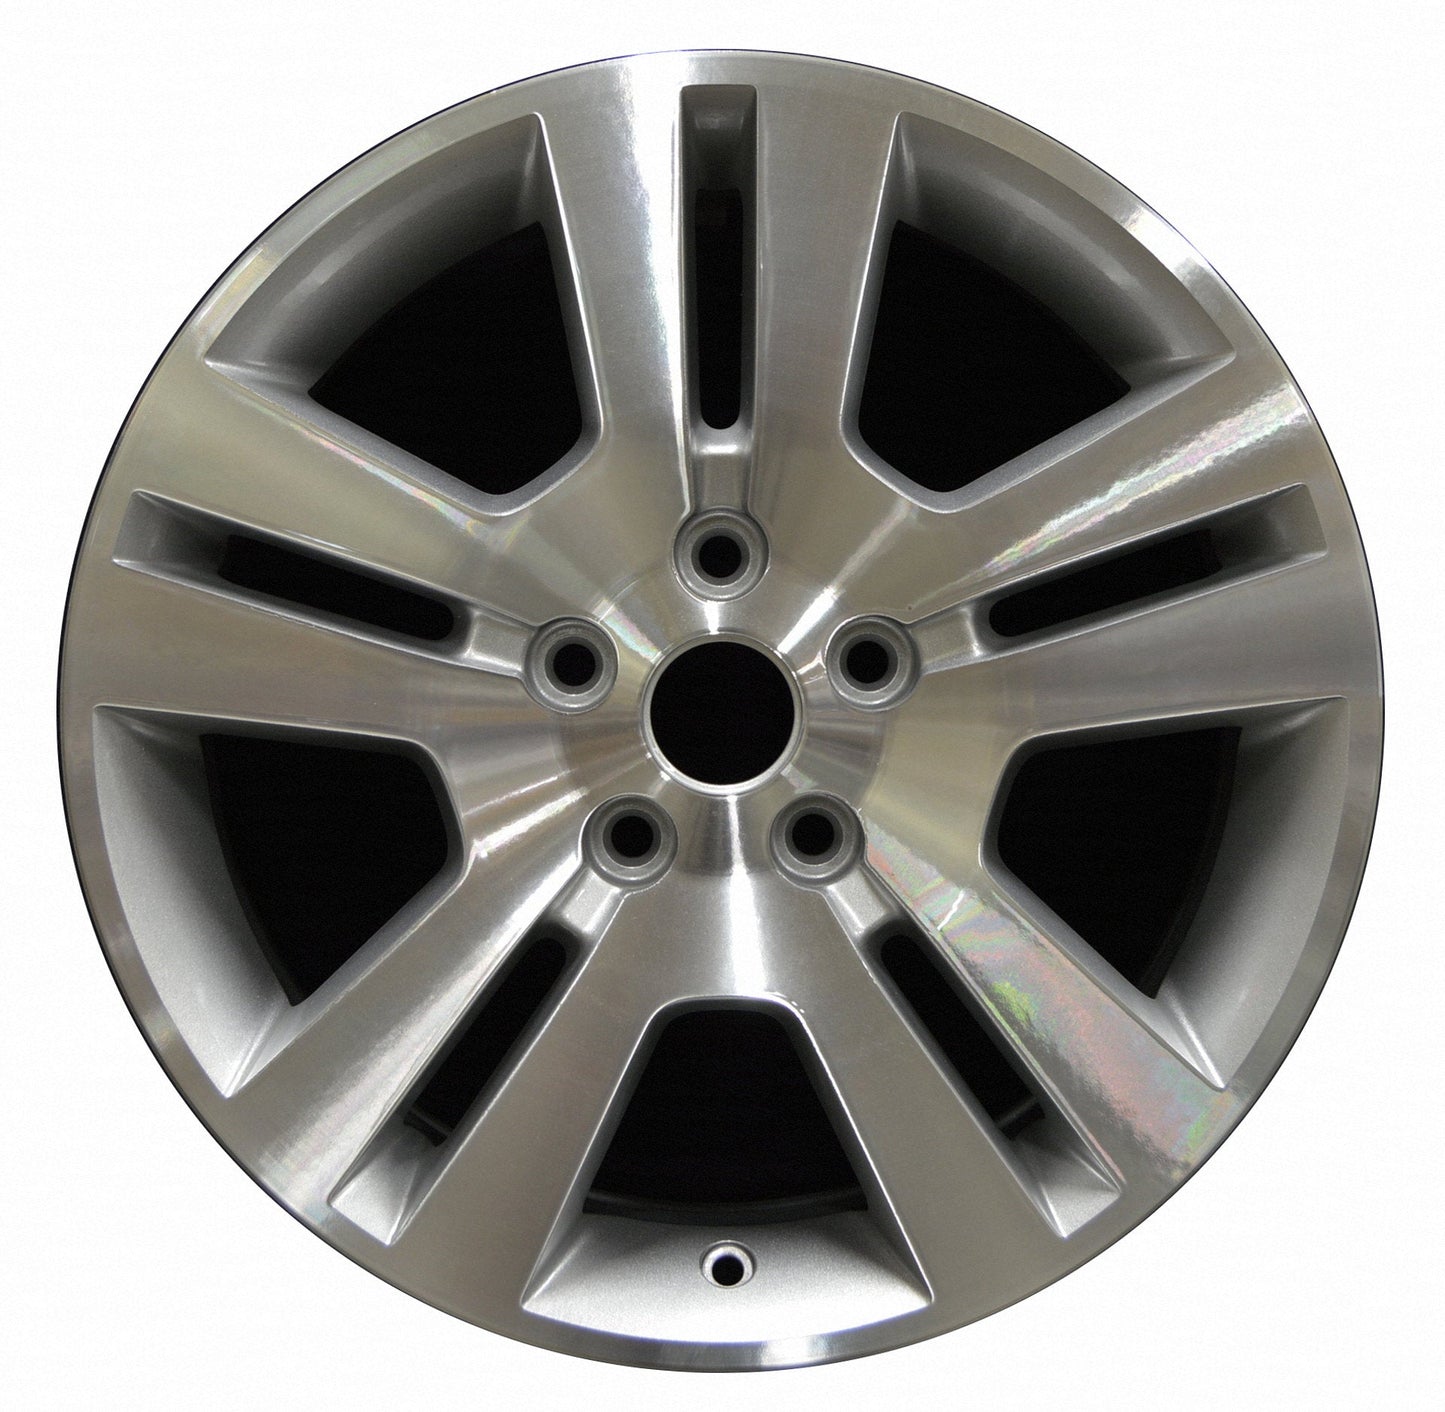 Ford Fusion  2006, 2007, 2008, 2009 Factory OEM Car Wheel Size 17x7 Alloy WAO.3628.PS02.MA